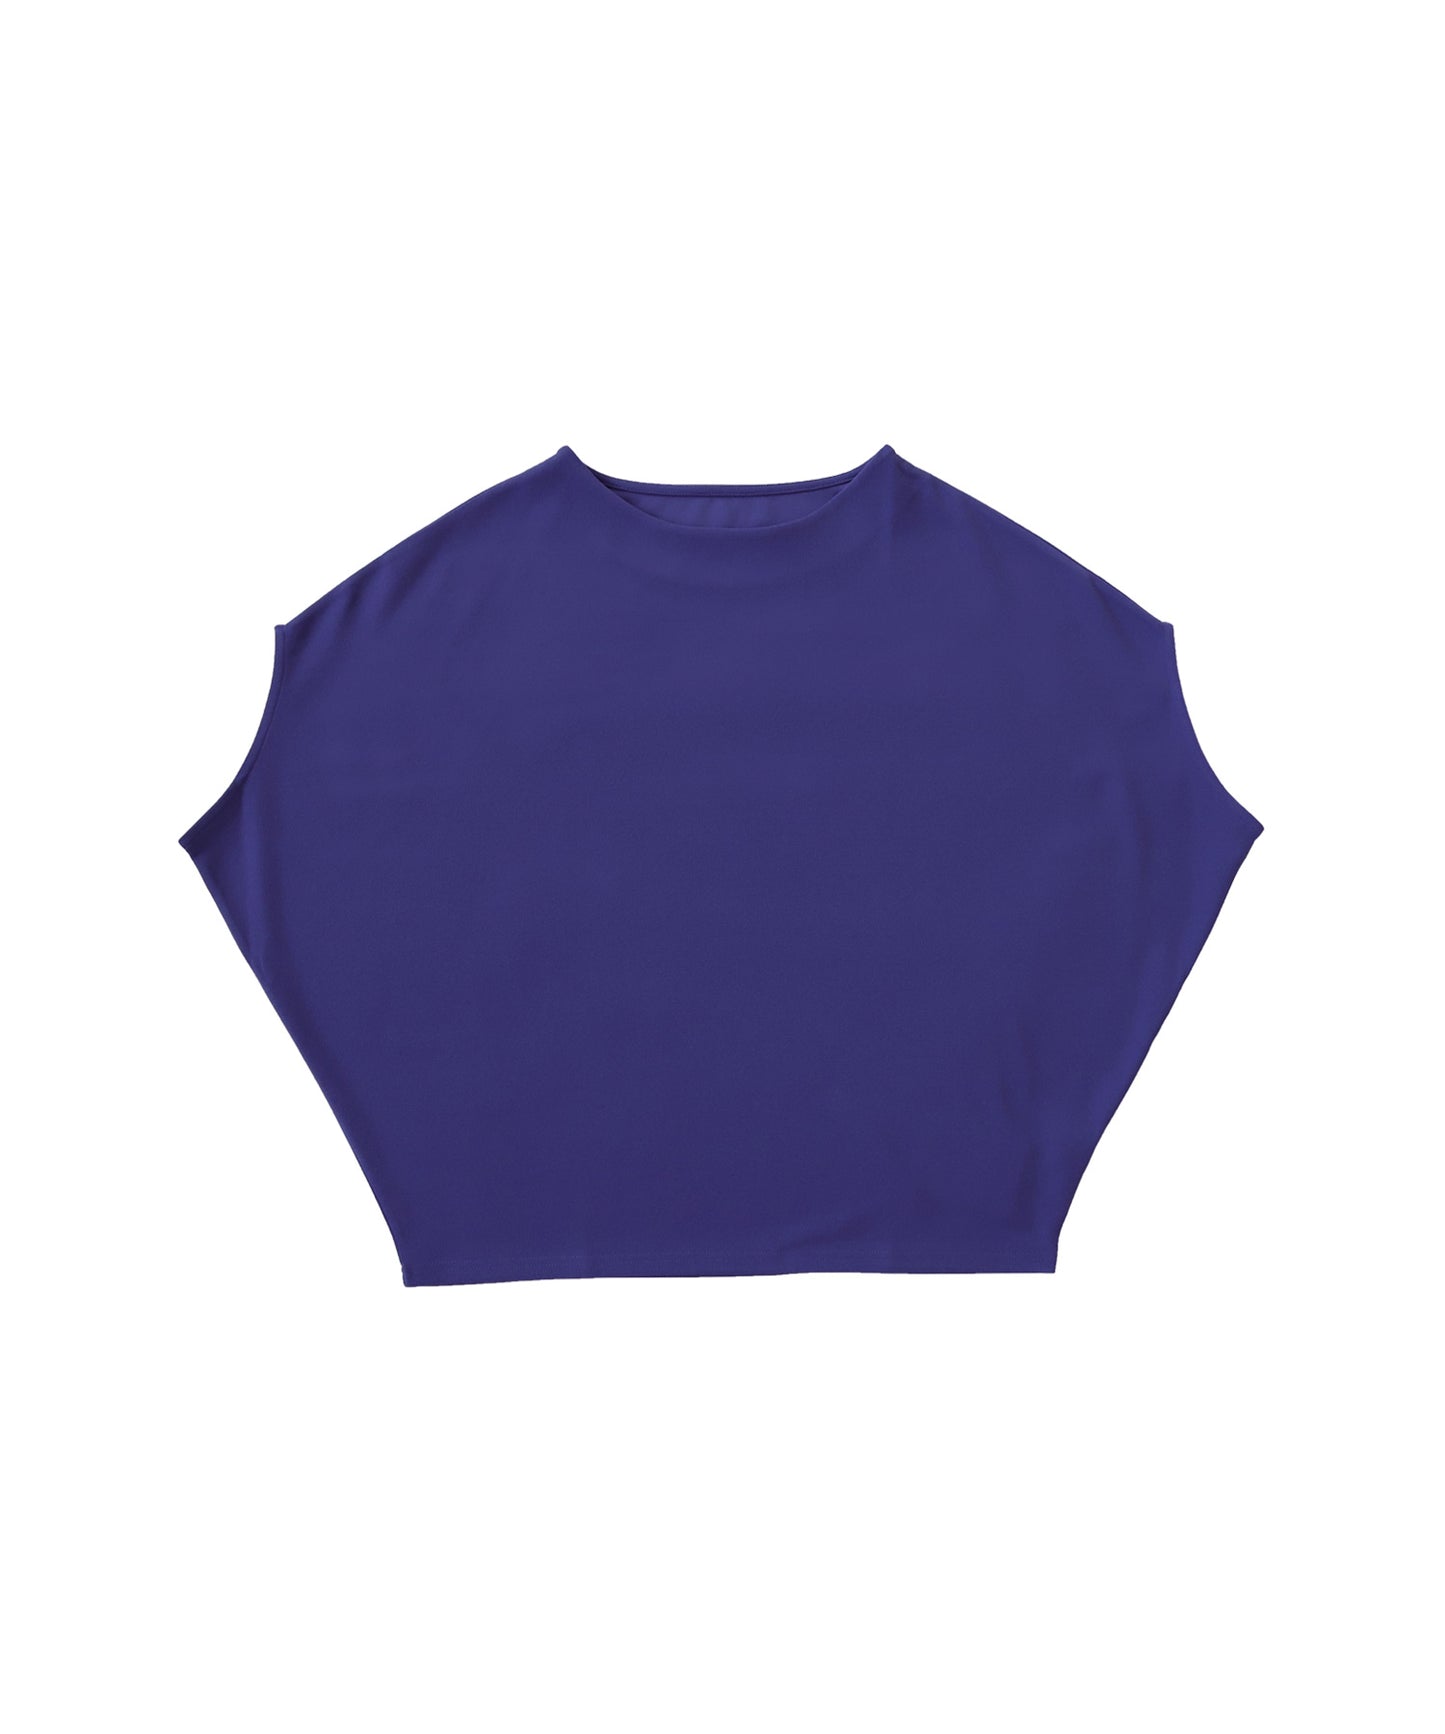 Boat neck deformed French sleeve tops Solid color Ladies tops